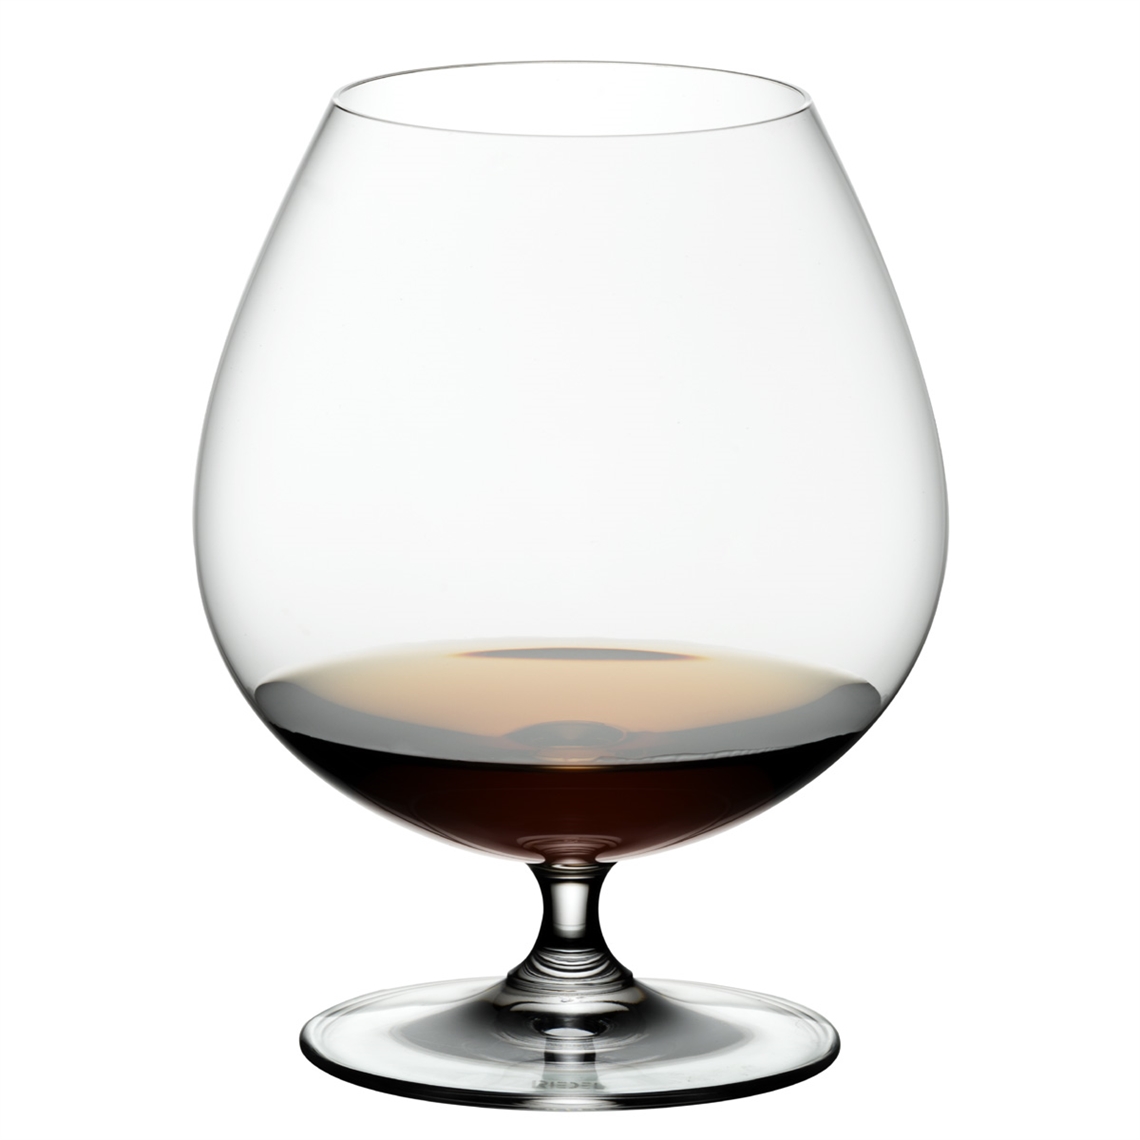 View more crystal wine glasses from our Spirit Glasses range